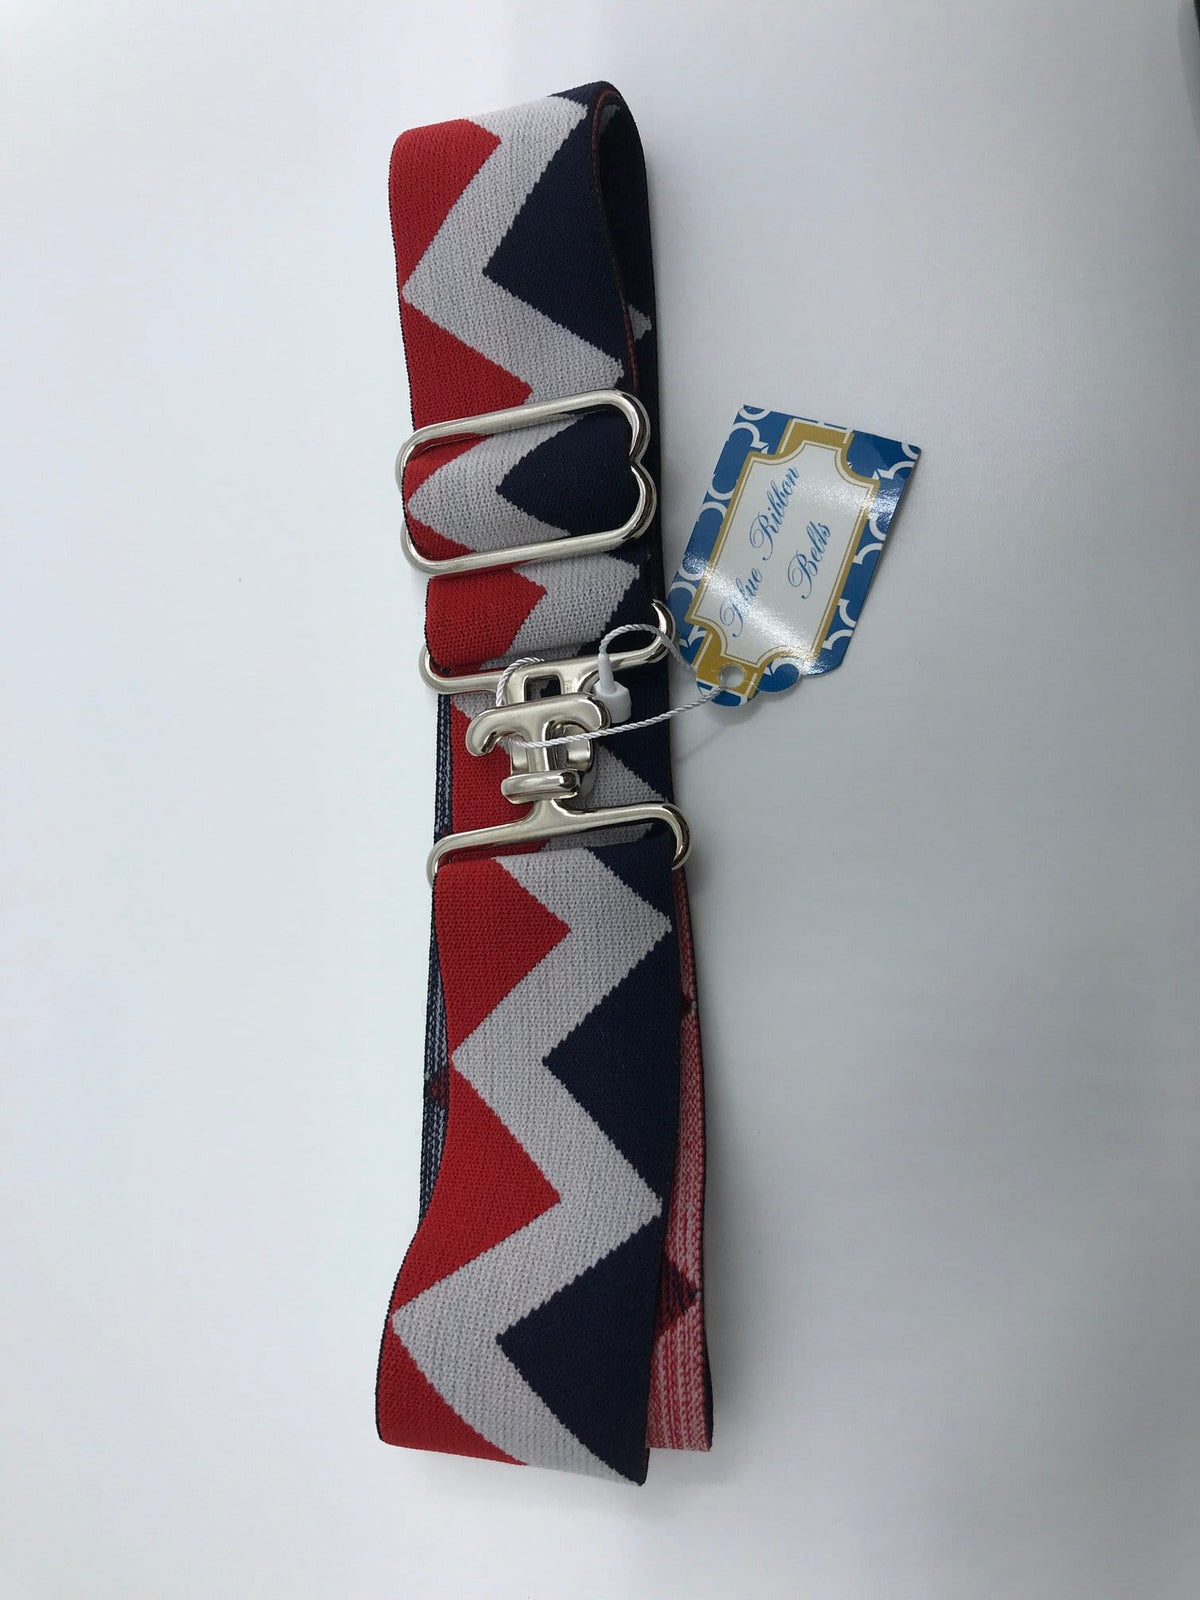 Blue Ribbon Belts Belt Red/White/Navy ZigZag Blue Ribbon Belts 1.5" equestrian team apparel online tack store mobile tack store custom farm apparel custom show stable clothing equestrian lifestyle horse show clothing riding clothes horses equestrian tack store